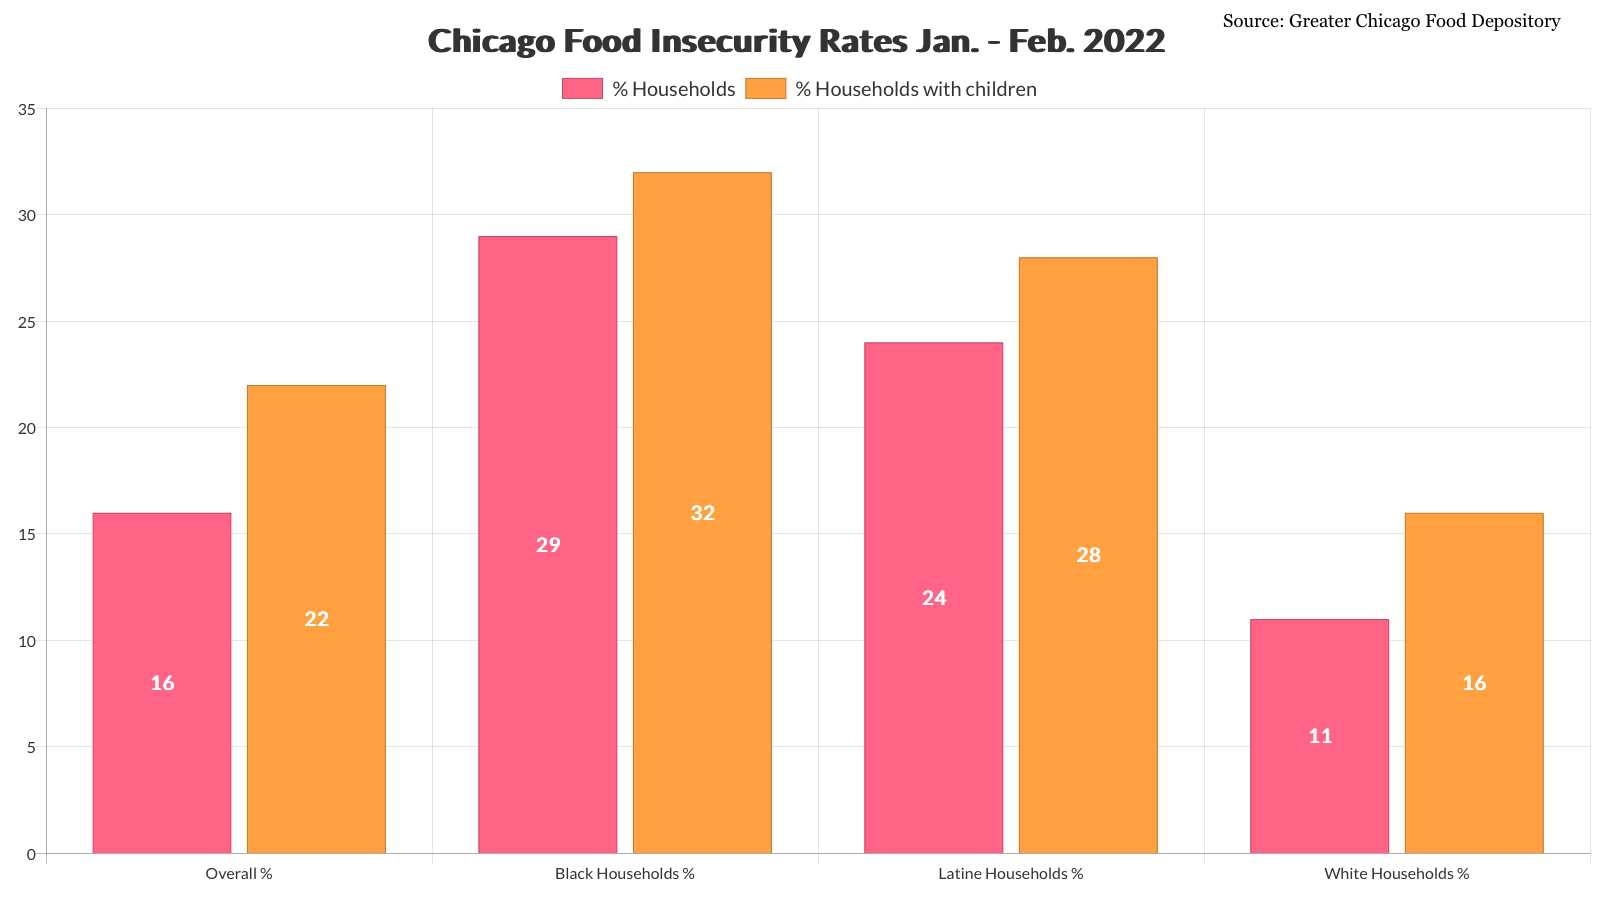 A bar graph showing food insecurity rates in Chicago by household versus households with children.